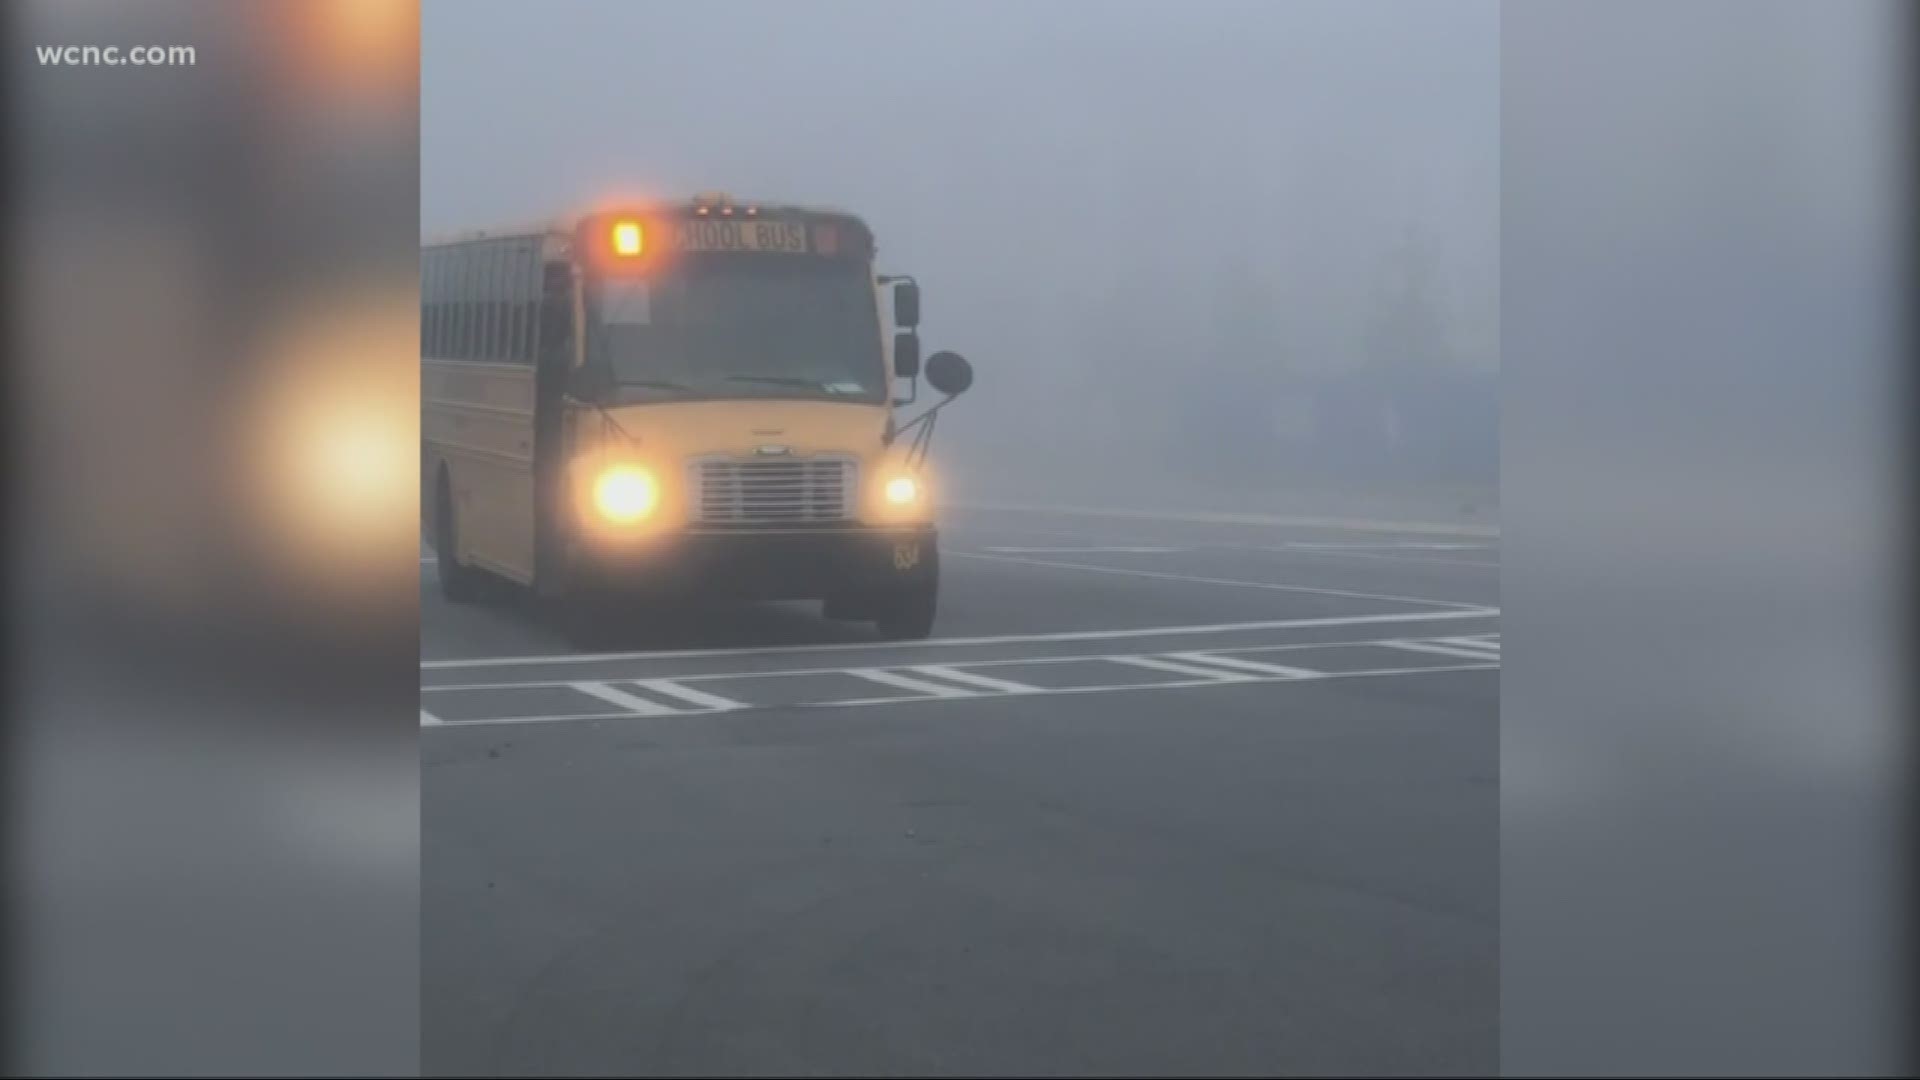 Parents are outraged after several drivers were caught on video breaking the law, speeding right past their kids' stopped bus. It's happening on Ardrey Kell Road.